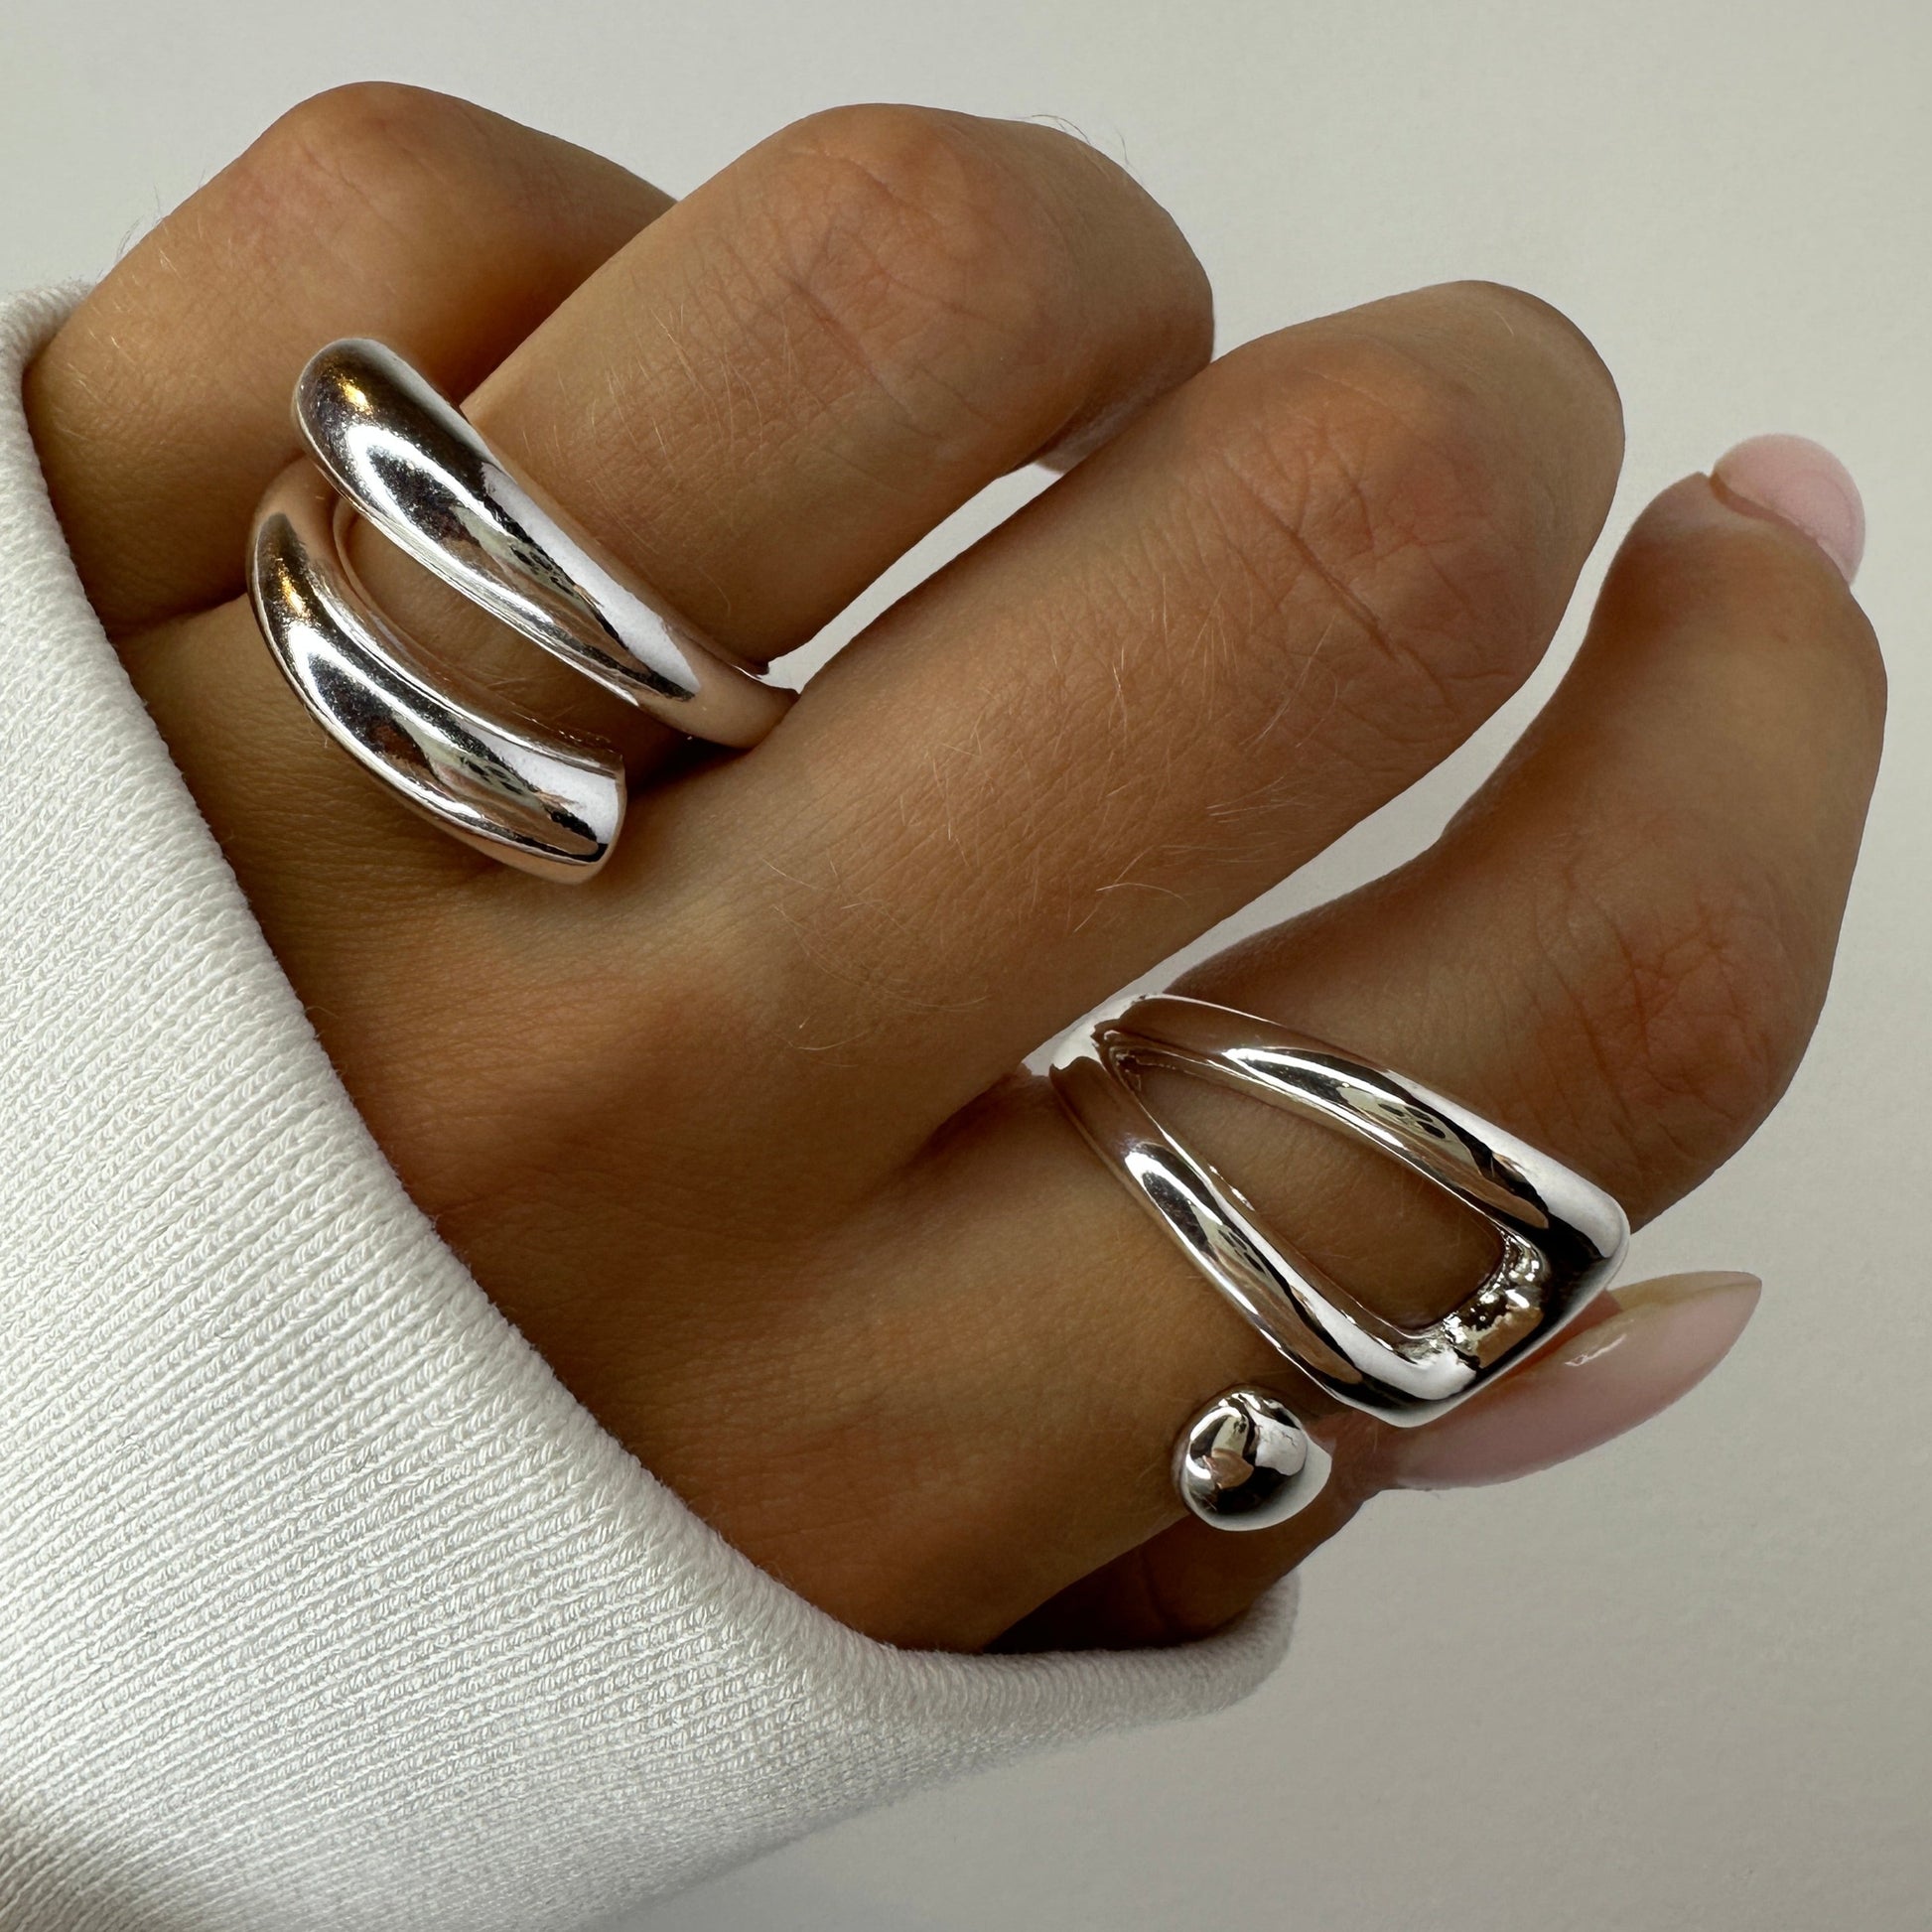 Irregular Hollow Open Rings, Unique Silver Ring, Abstract Silver Ring,  Unusual Shaped Ring, Adjustable Rings,gift for Her or Him 